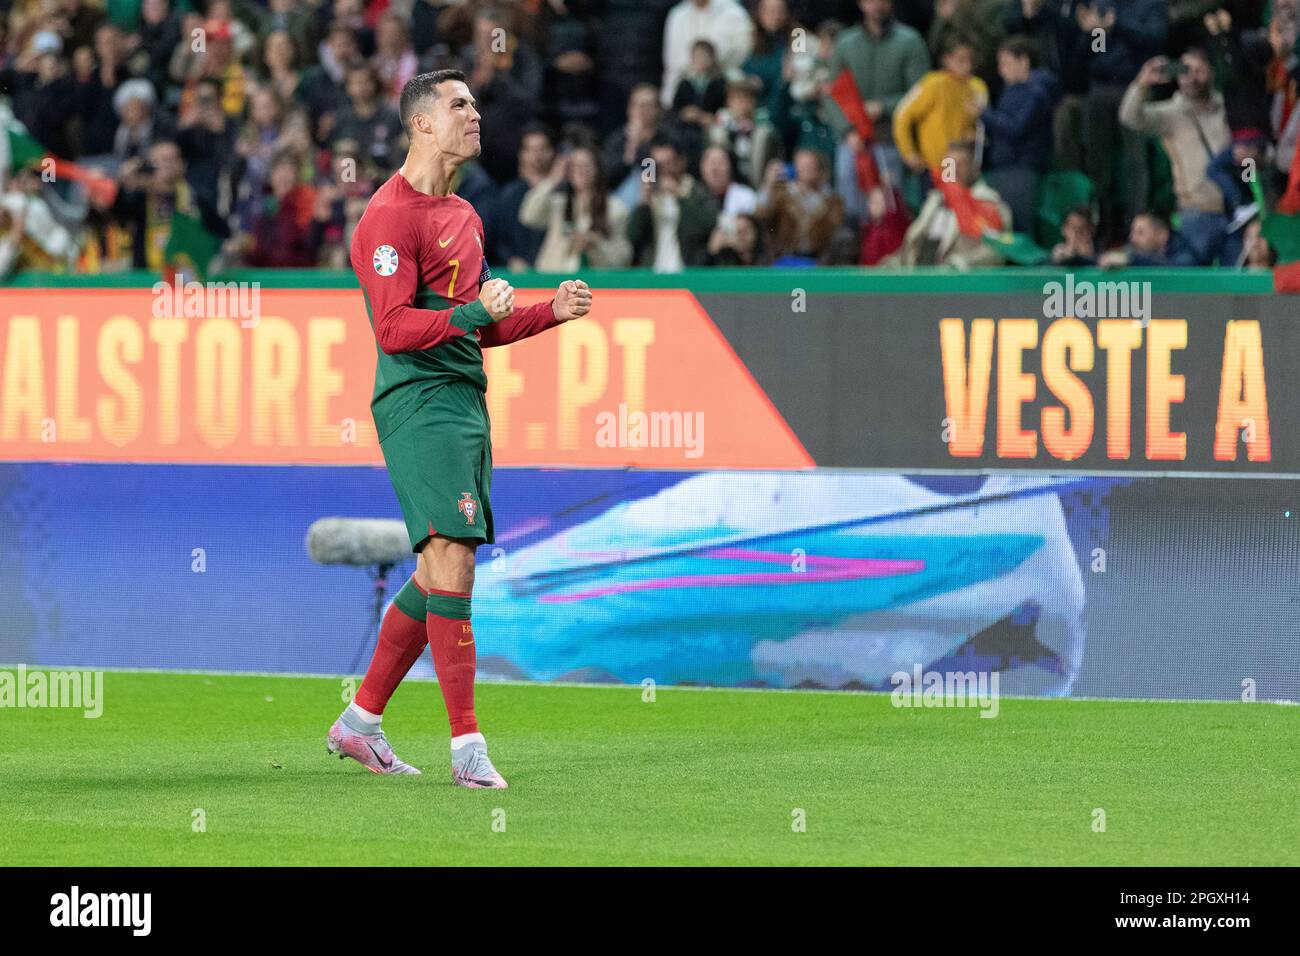 March 23, 2023. Lisbon, Portugal. Portugal's and Al Nassr forward Cristiano Ronaldo (7) celebrating after scoring a goal during the 1st Round of Group J for the Euro 2024 Qualifying Round, Portugal vs Liechtenstein Credit: Alexandre de Sousa/Alamy Live News Stock Photo